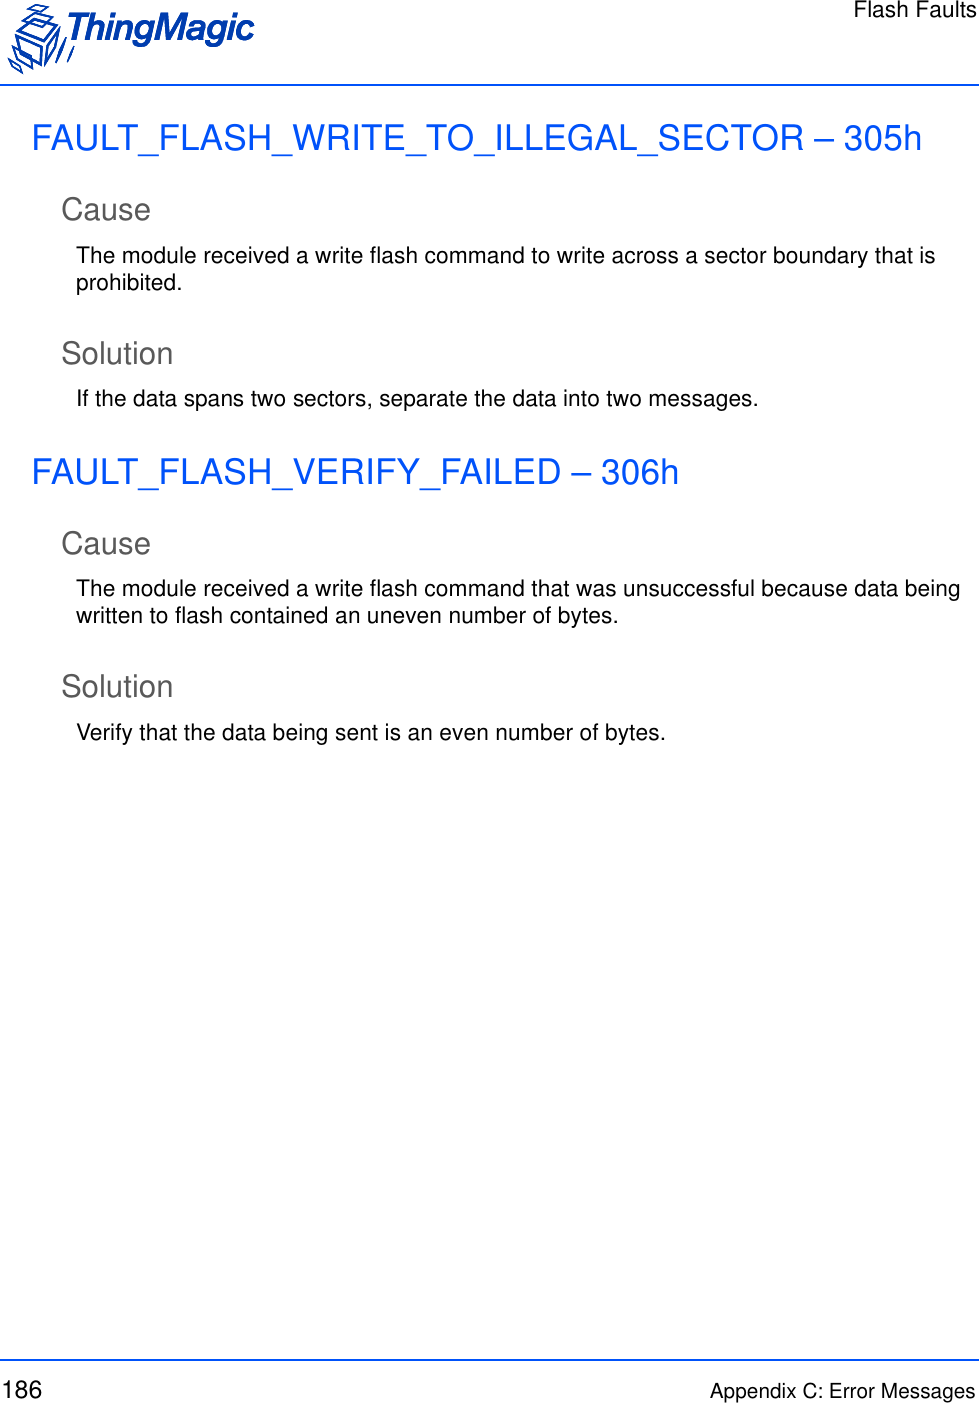 Flash Faults186 Appendix C: Error MessagesFAULT_FLASH_WRITE_TO_ILLEGAL_SECTOR – 305hCauseThe module received a write flash command to write across a sector boundary that is prohibited.SolutionIf the data spans two sectors, separate the data into two messages.FAULT_FLASH_VERIFY_FAILED – 306hCauseThe module received a write flash command that was unsuccessful because data being written to flash contained an uneven number of bytes.SolutionVerify that the data being sent is an even number of bytes.